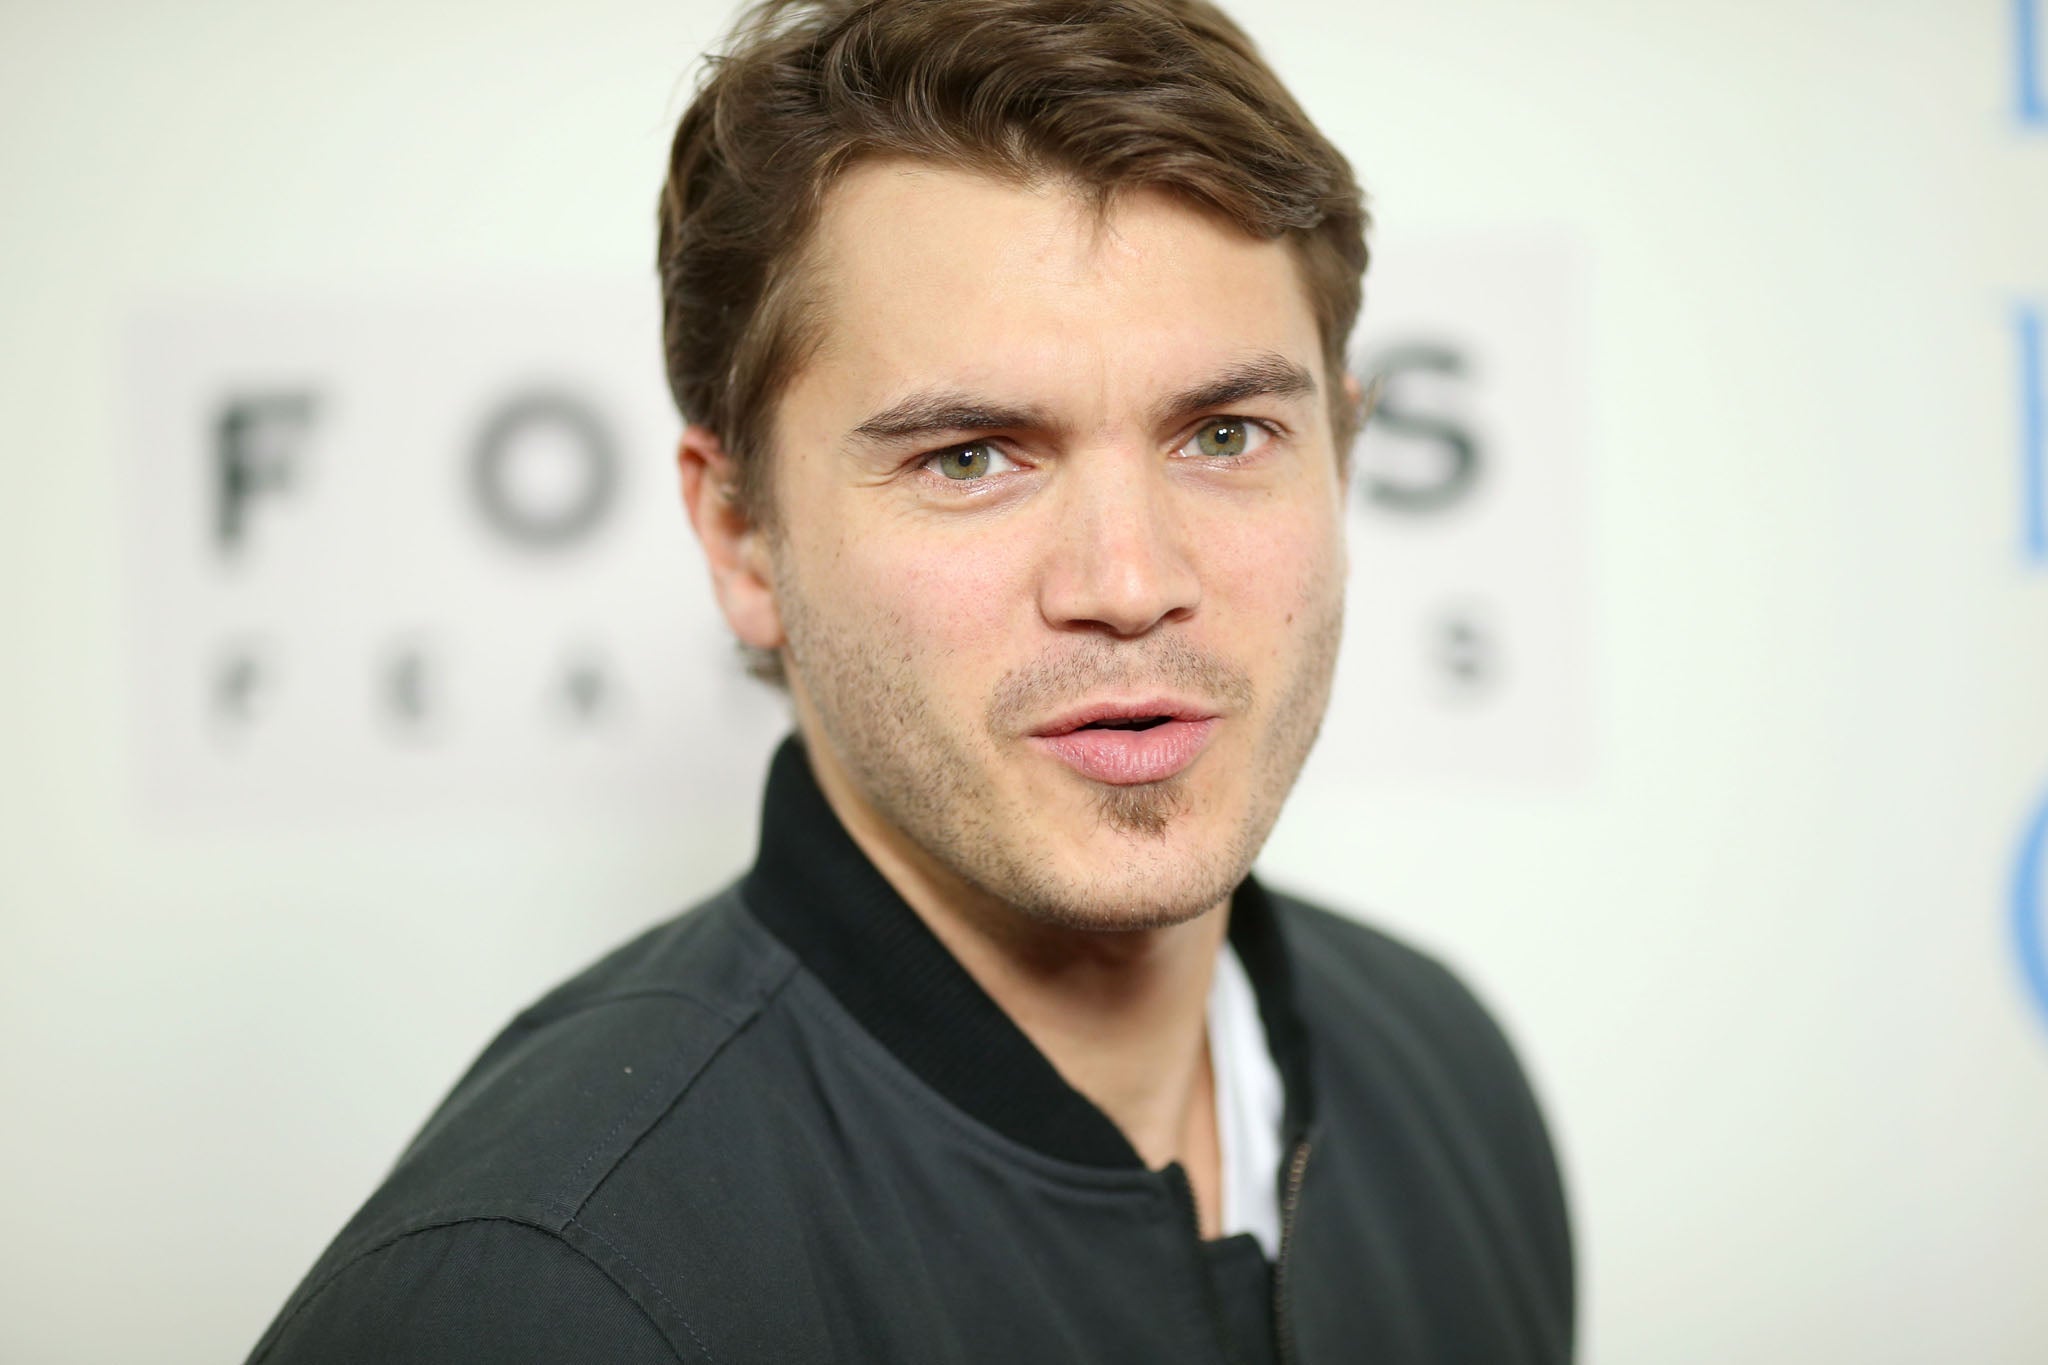 Emile Hirsch has been cast as John Belushi in a biopic about the comedian's life